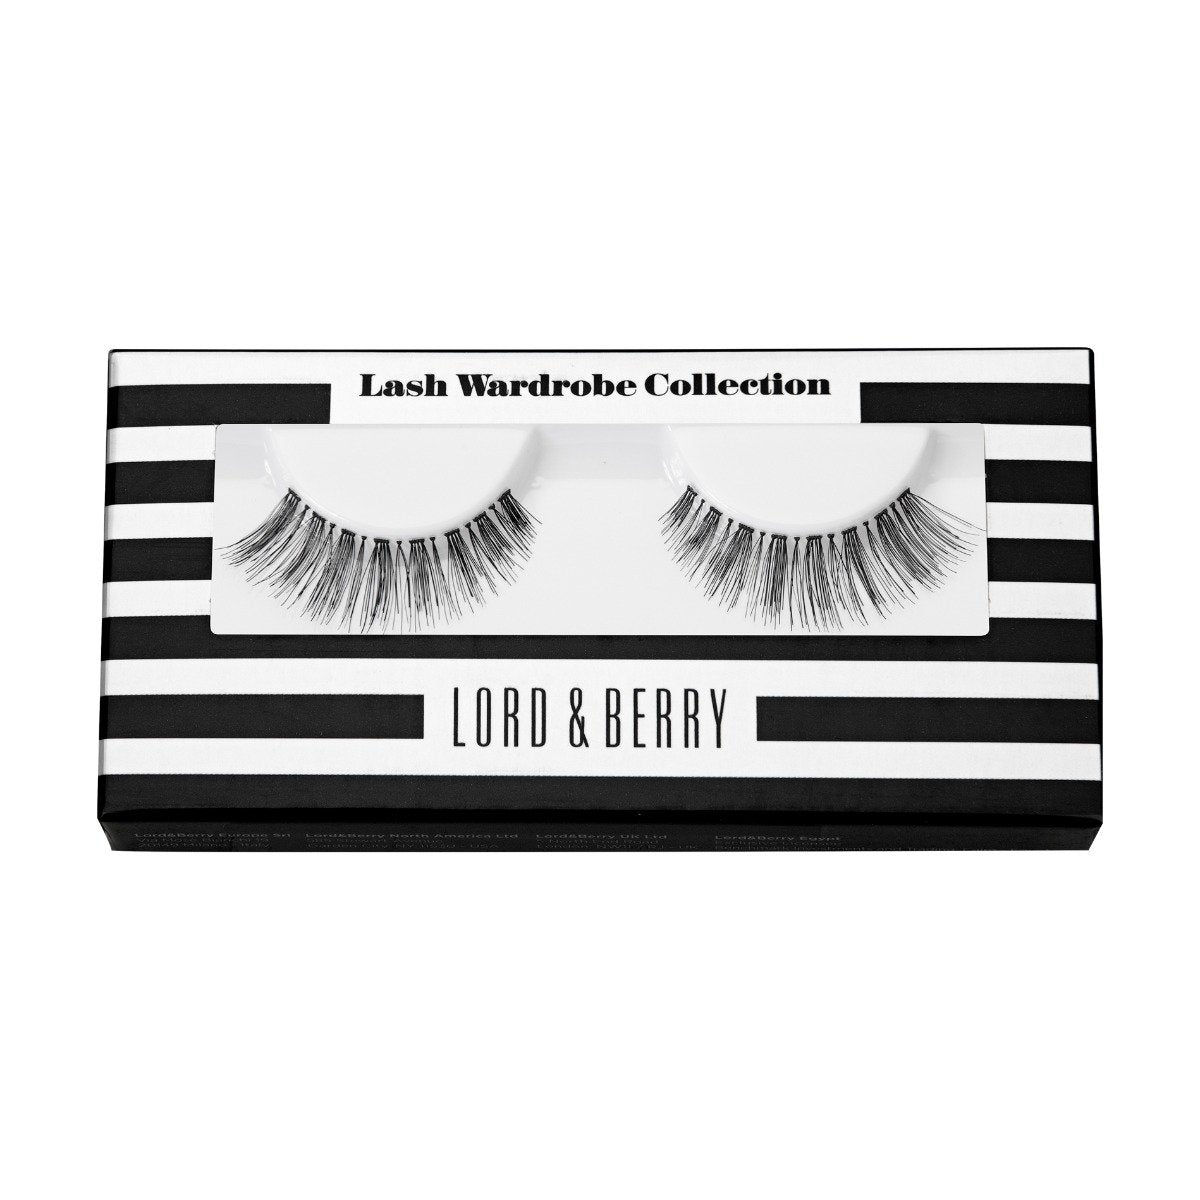 Lord & Berry Eyelashes Wardrobe Collection - EL1 - Bloom Pharmacy